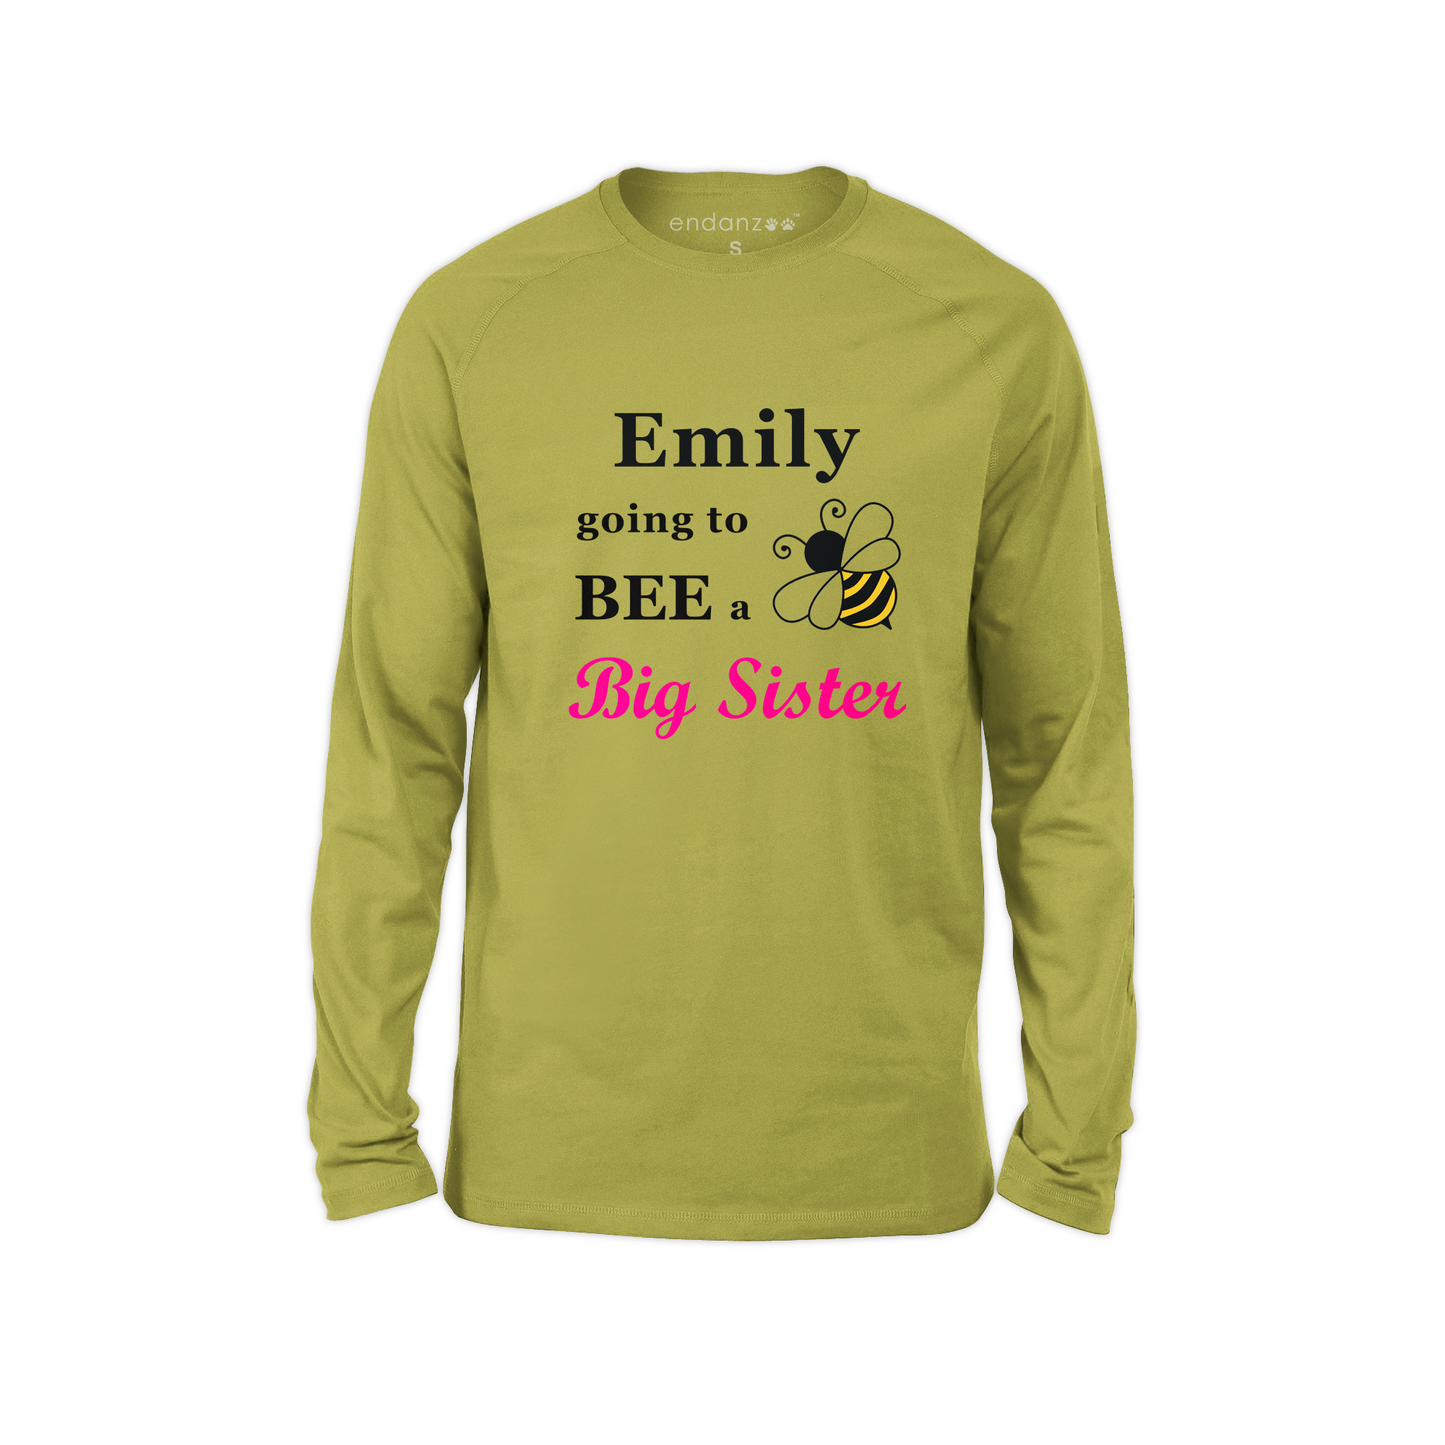 [Personalized] Going to BEE Big Sister Organic Kids Tee Shirt